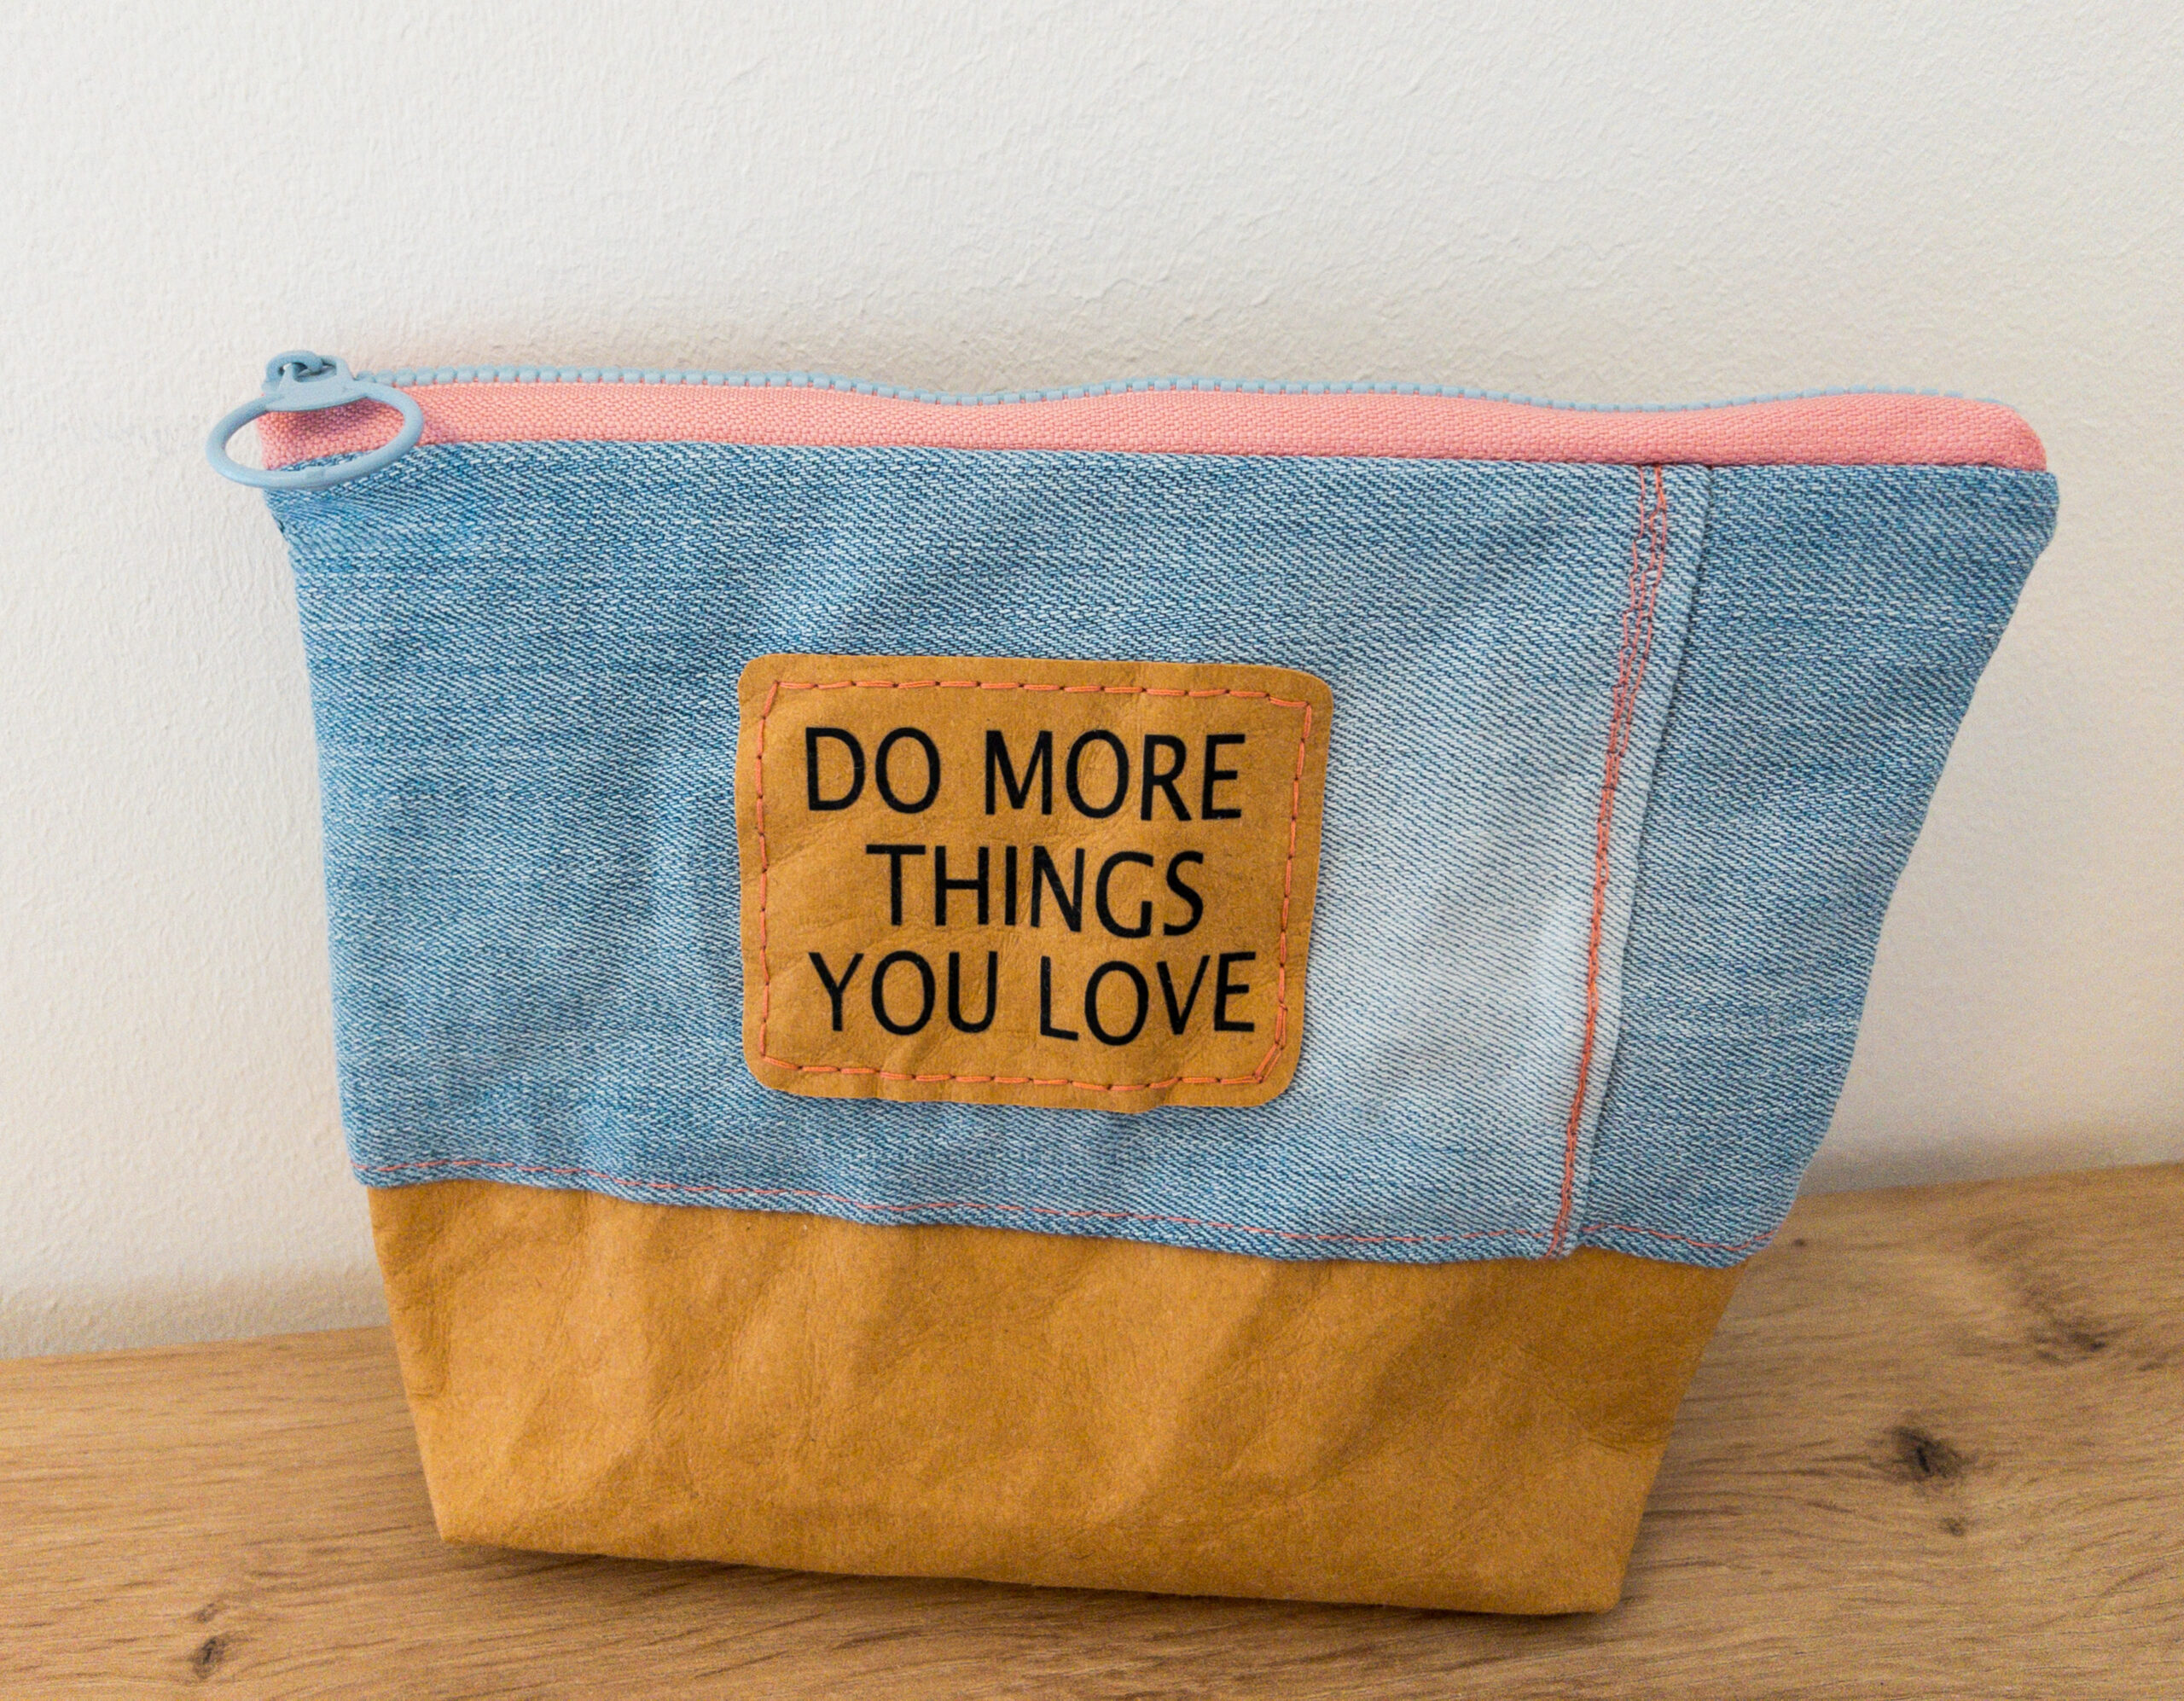 APC 1208 hdr 2 scaled - kleine Papier-Leder Tasche -do more things you love-